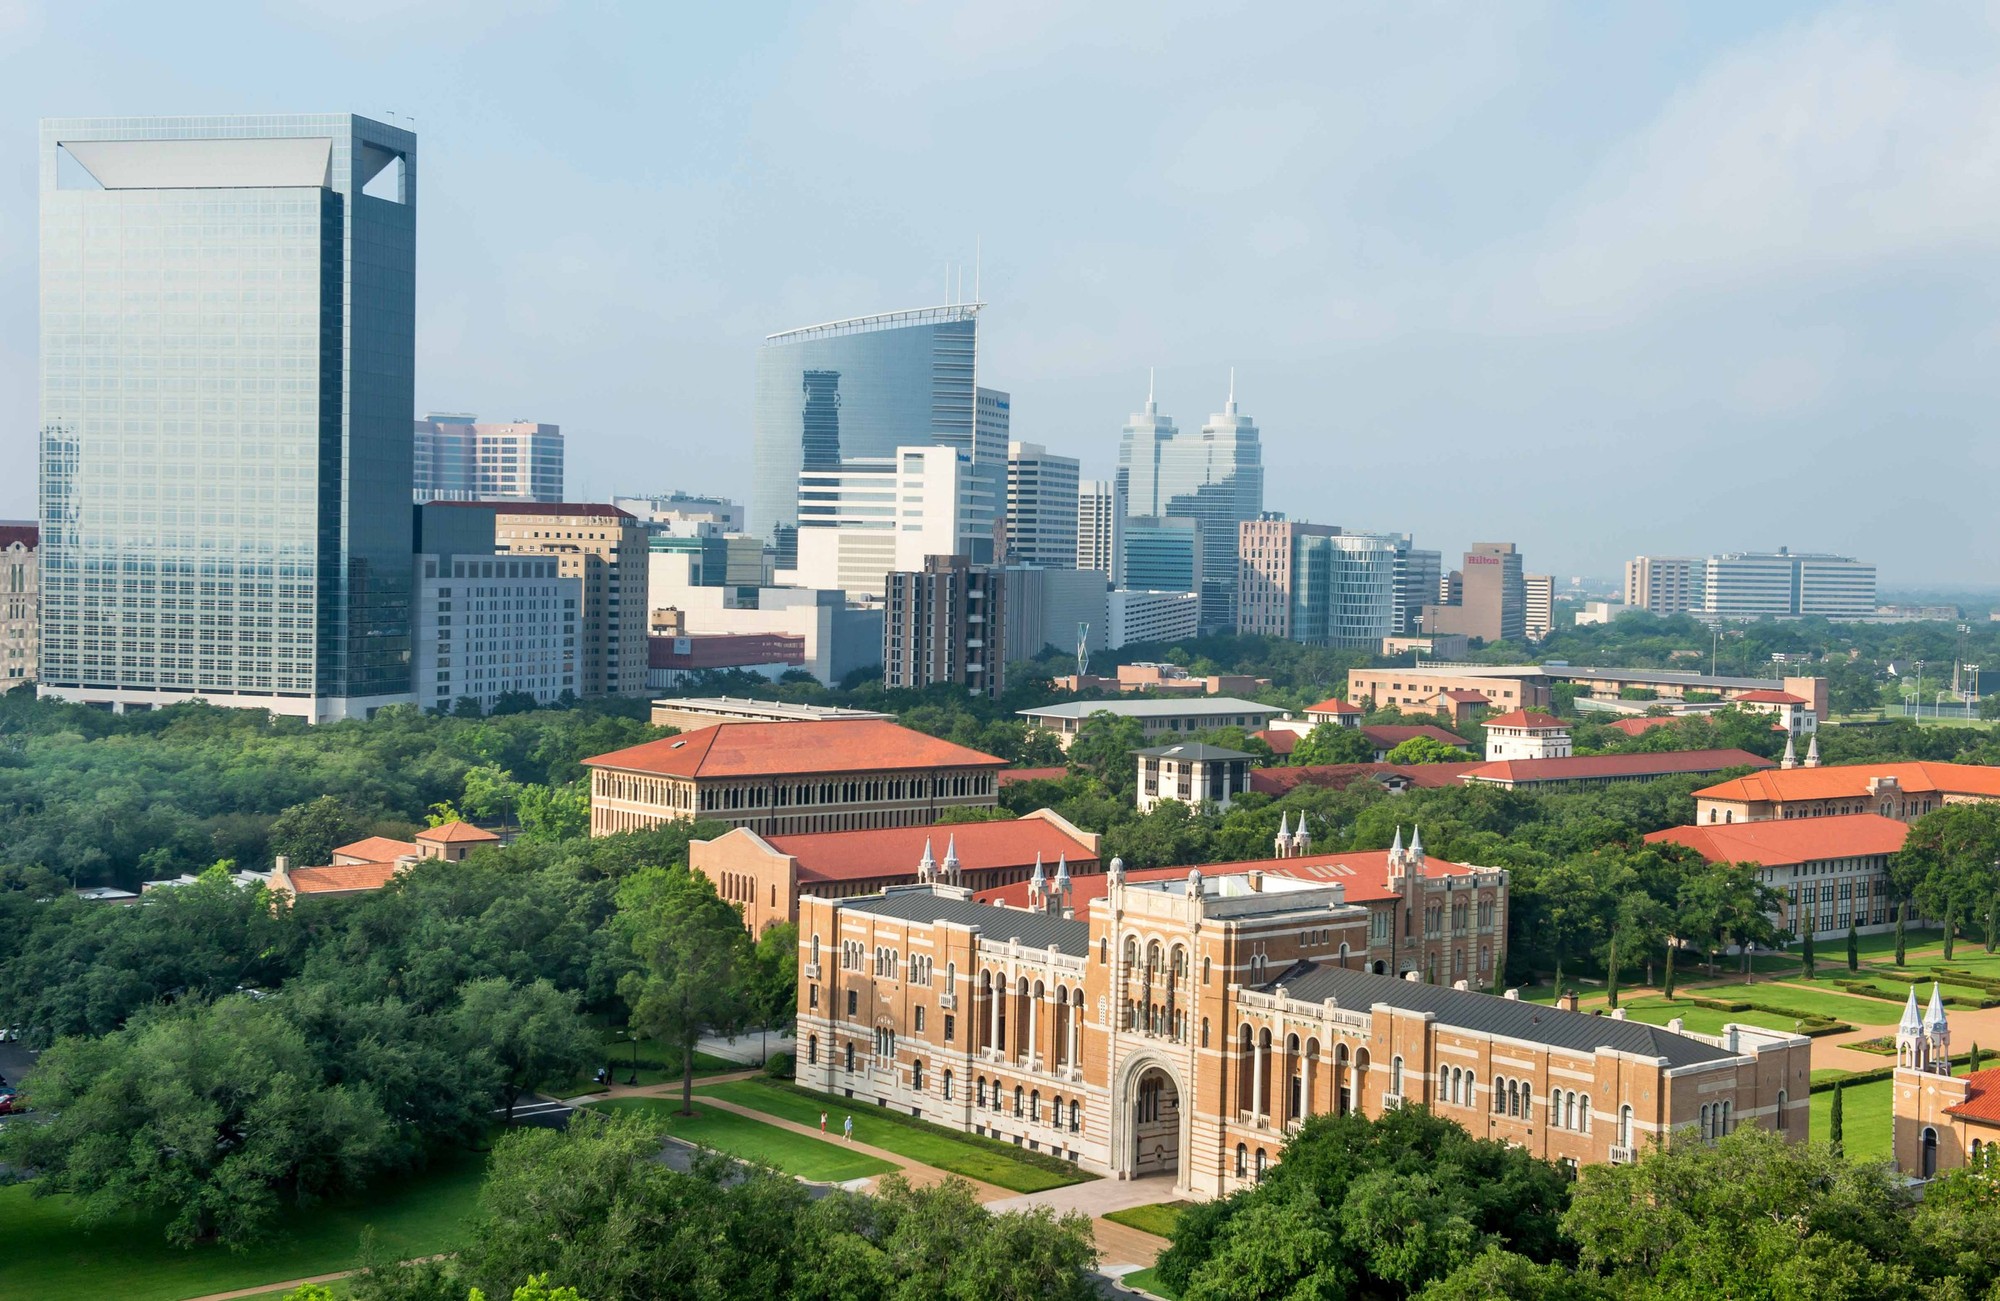 Aerial view of Rice University's Lovett Hall with tall buildings in the background